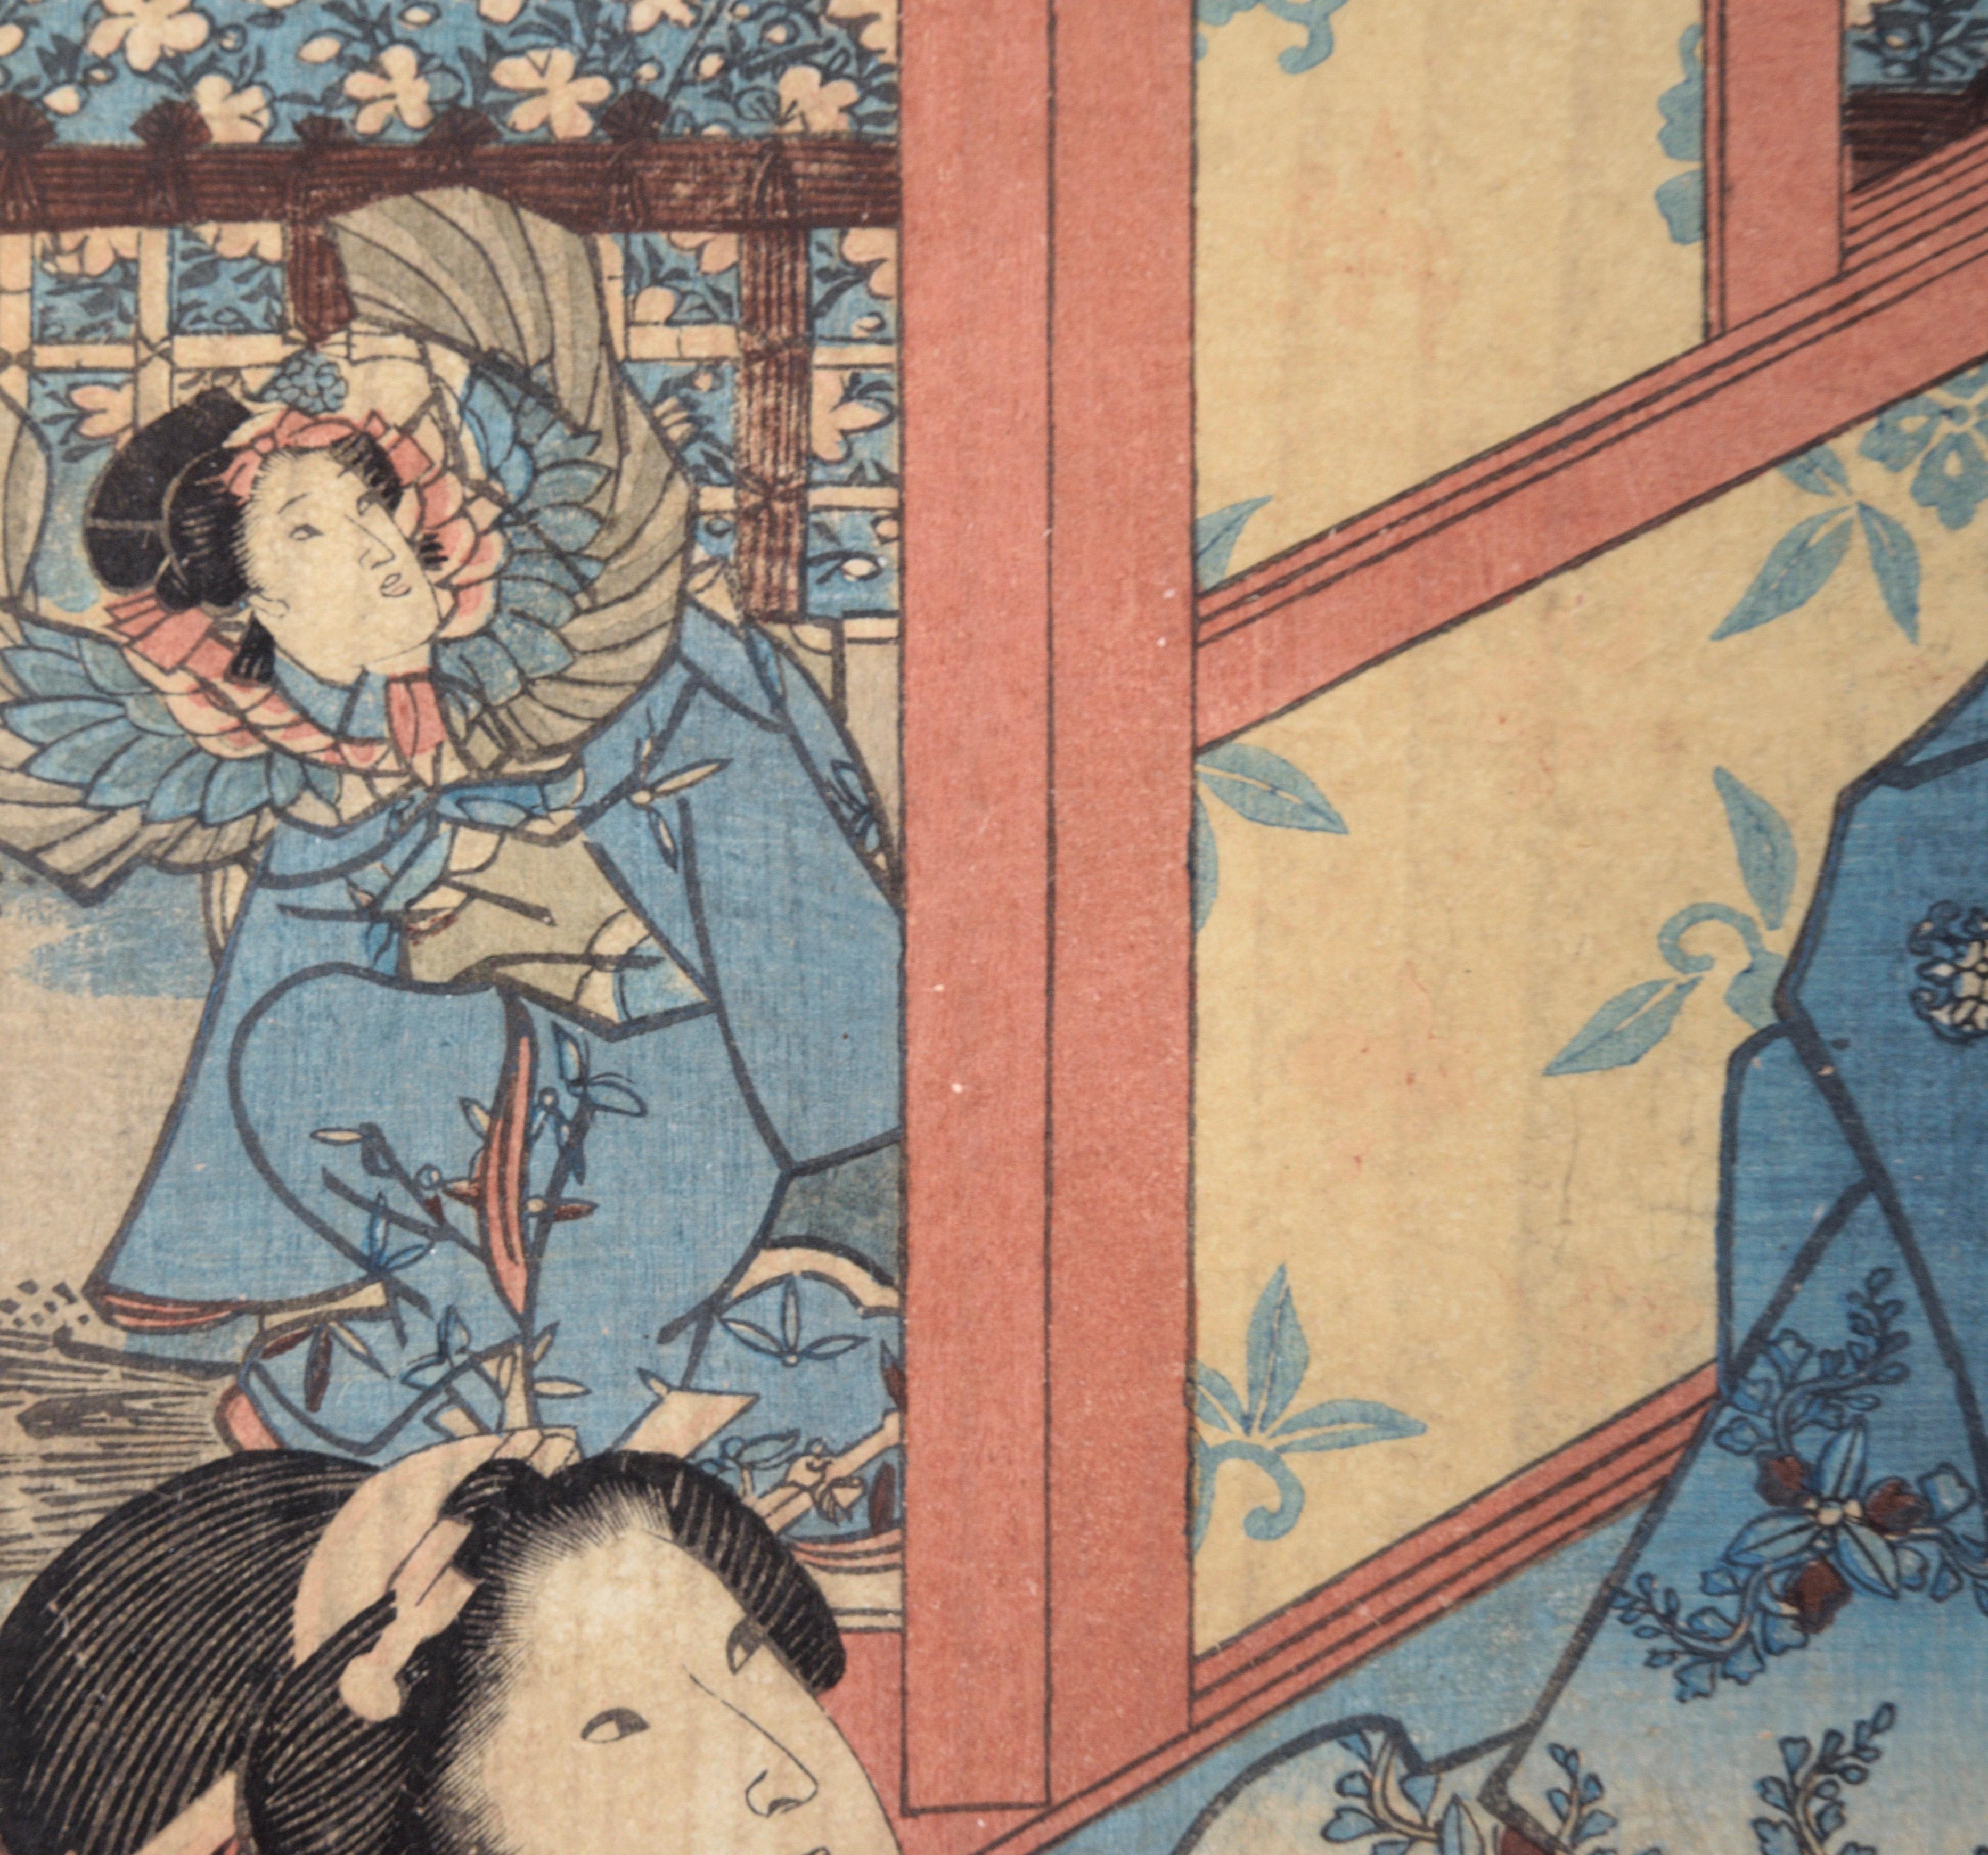 The Four Seasons: Spring - Japanese Woodblock Triptych in Ink on Paper

Colorful kabuki scene by Utagawa Kuniteru (Japanese, active 1818-1860). Attractive scene from the 